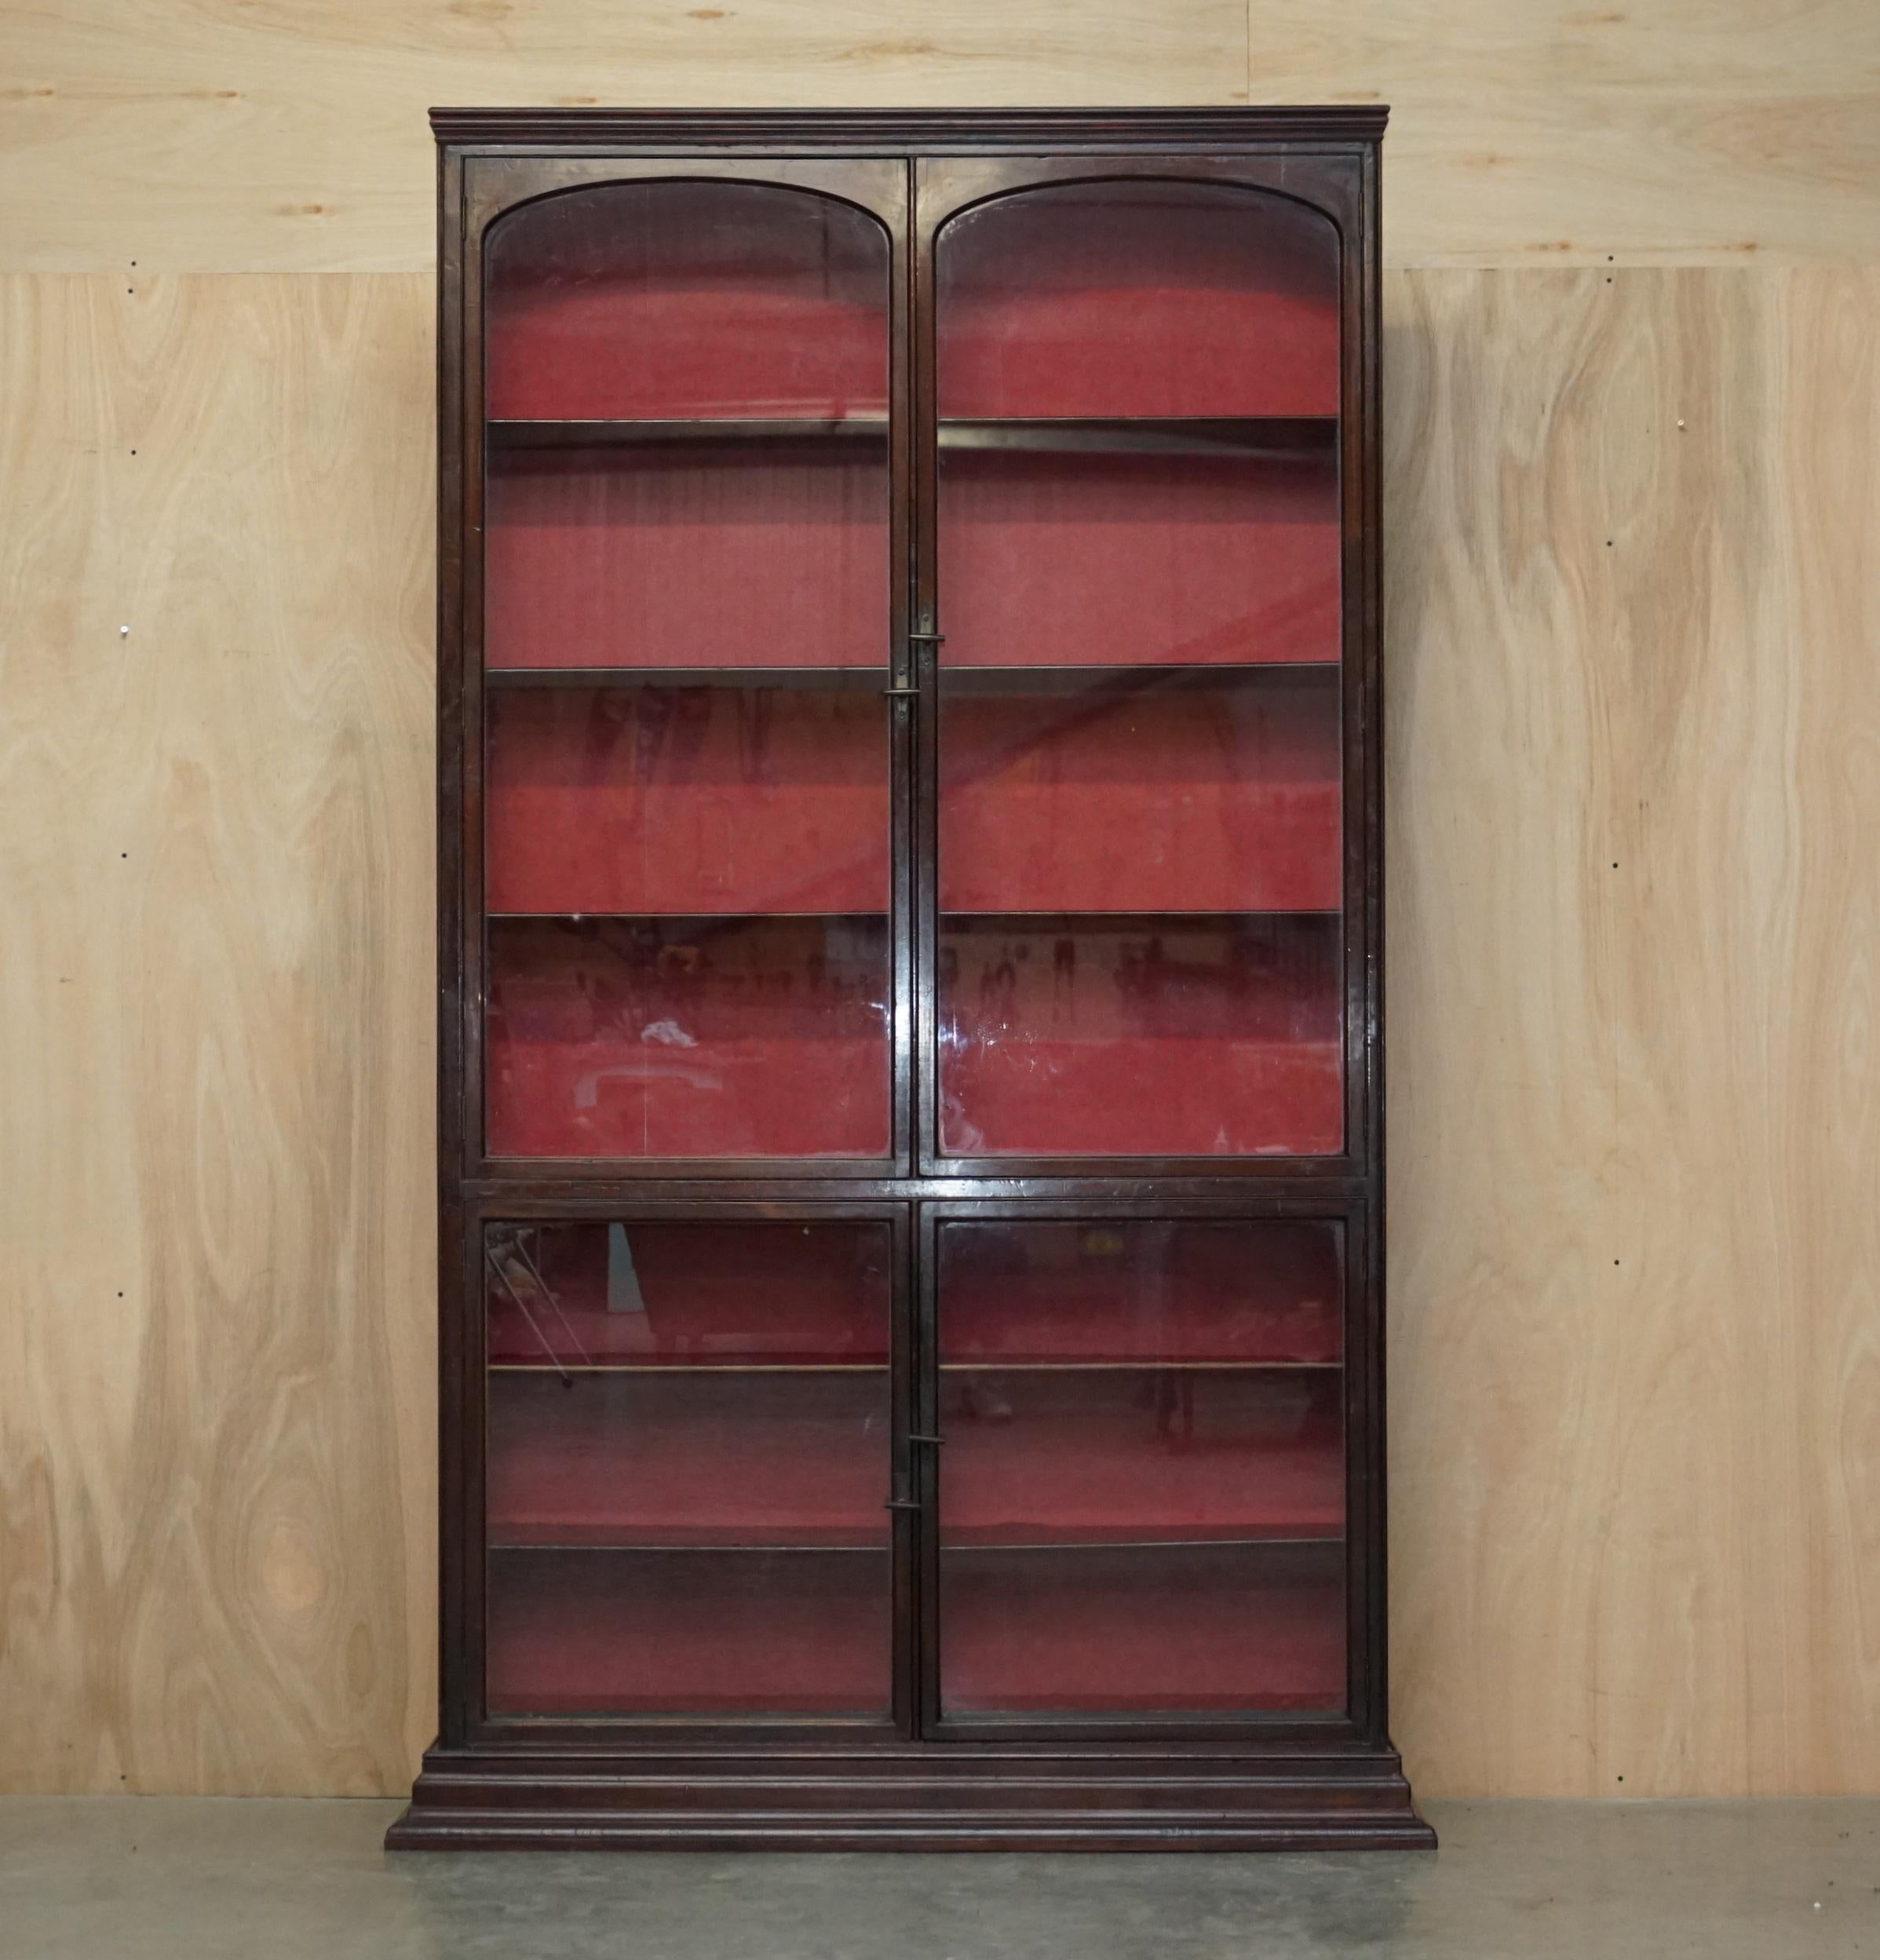 Royal House Antiques

Royal House Antiques is delighted to offer for sale this stunning original mid-Victorian Apothecary or Haberdashery cabinet library bookcase

Please note the delivery fee listed is just a guide, it covers within the M25 only